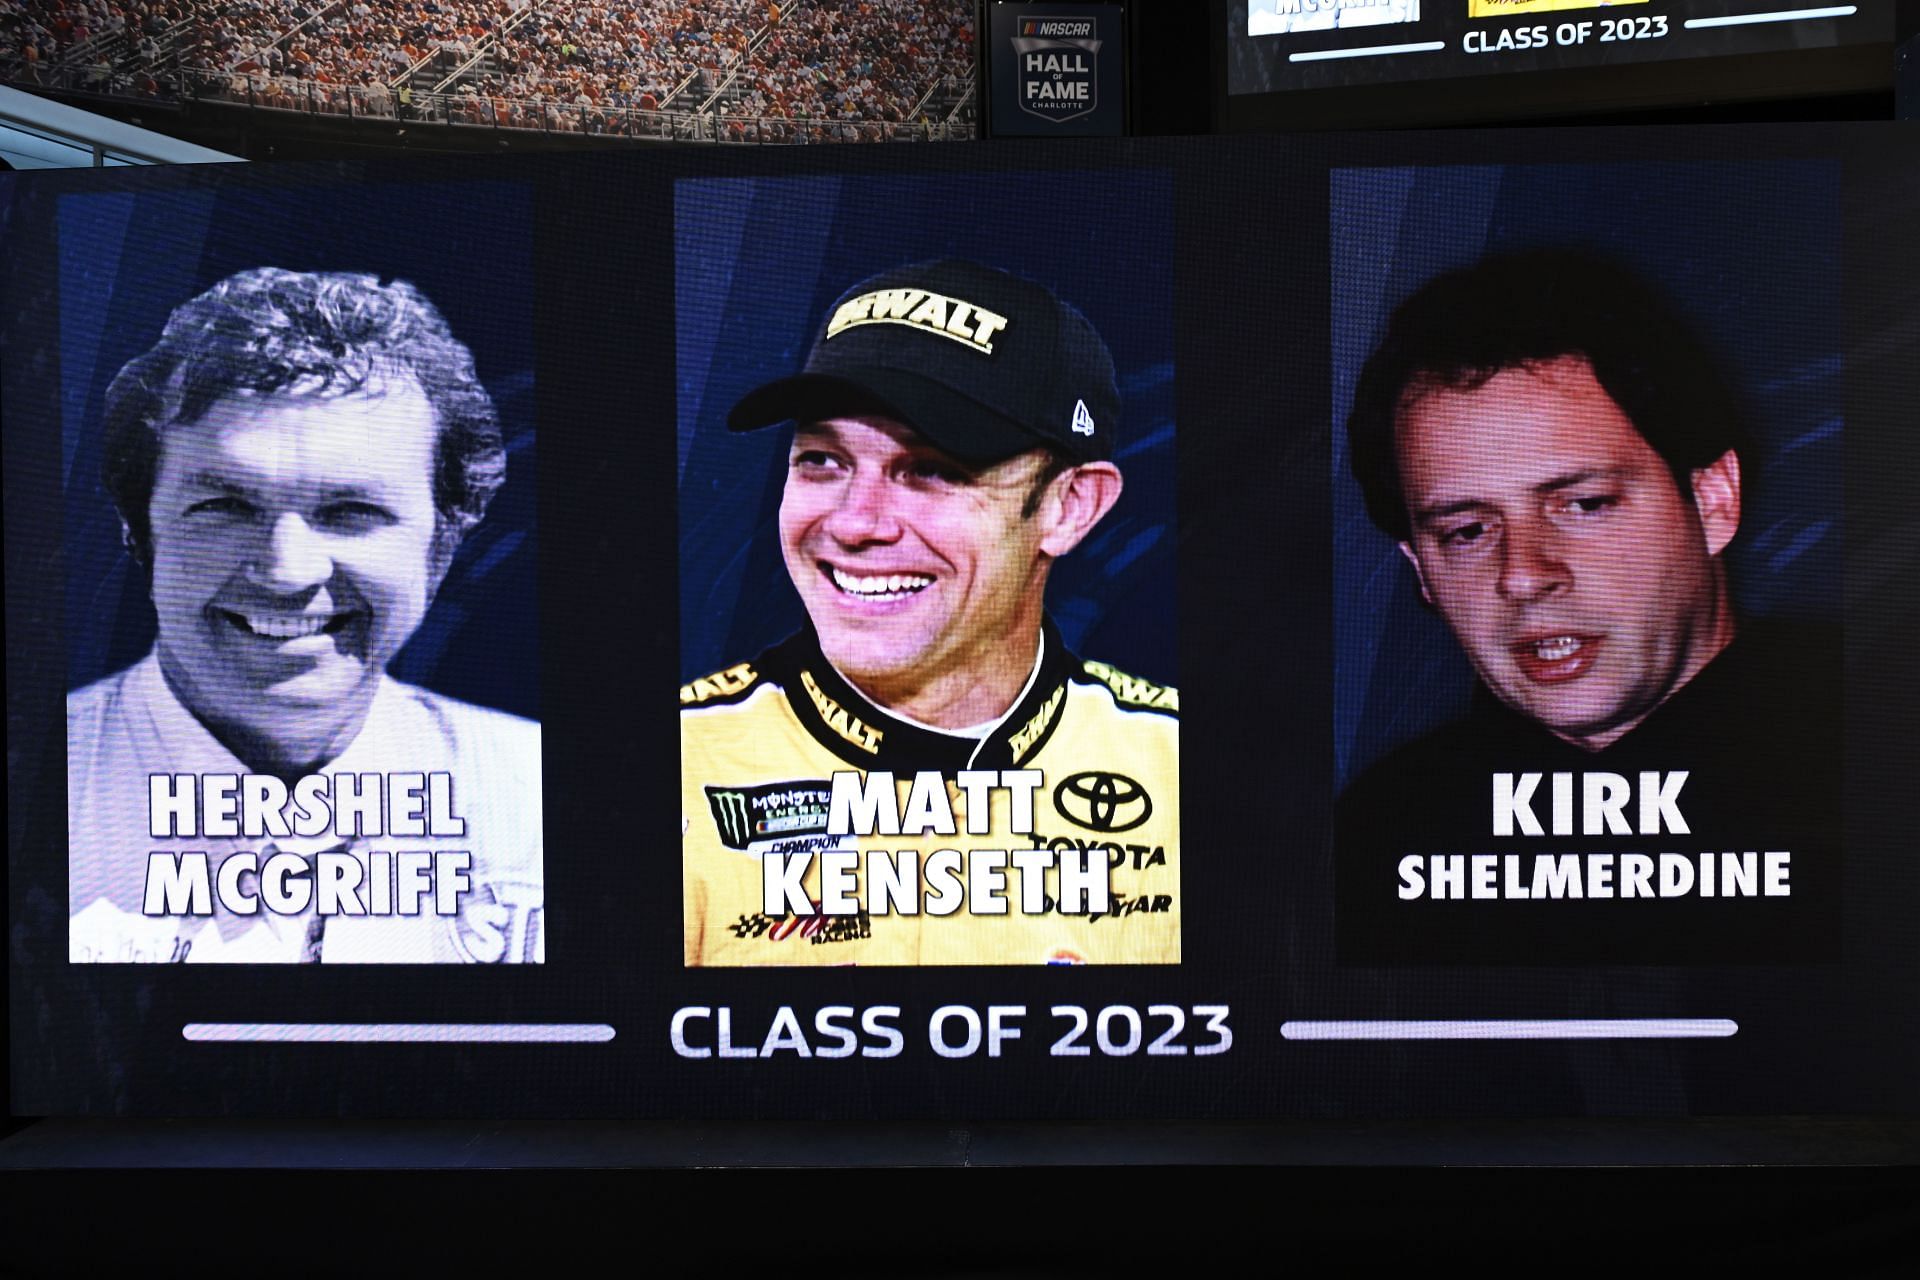 The class of Hershel McGriff, Matt Kenseth, and Kirk Shelmerdine seen on a sign during the NASCAR 2023 Hall of Fame announcement ceremony at NASCAR Hall of Fame in Charlotte, North Carolina. (Photo by Eakin Howard/Getty Images)